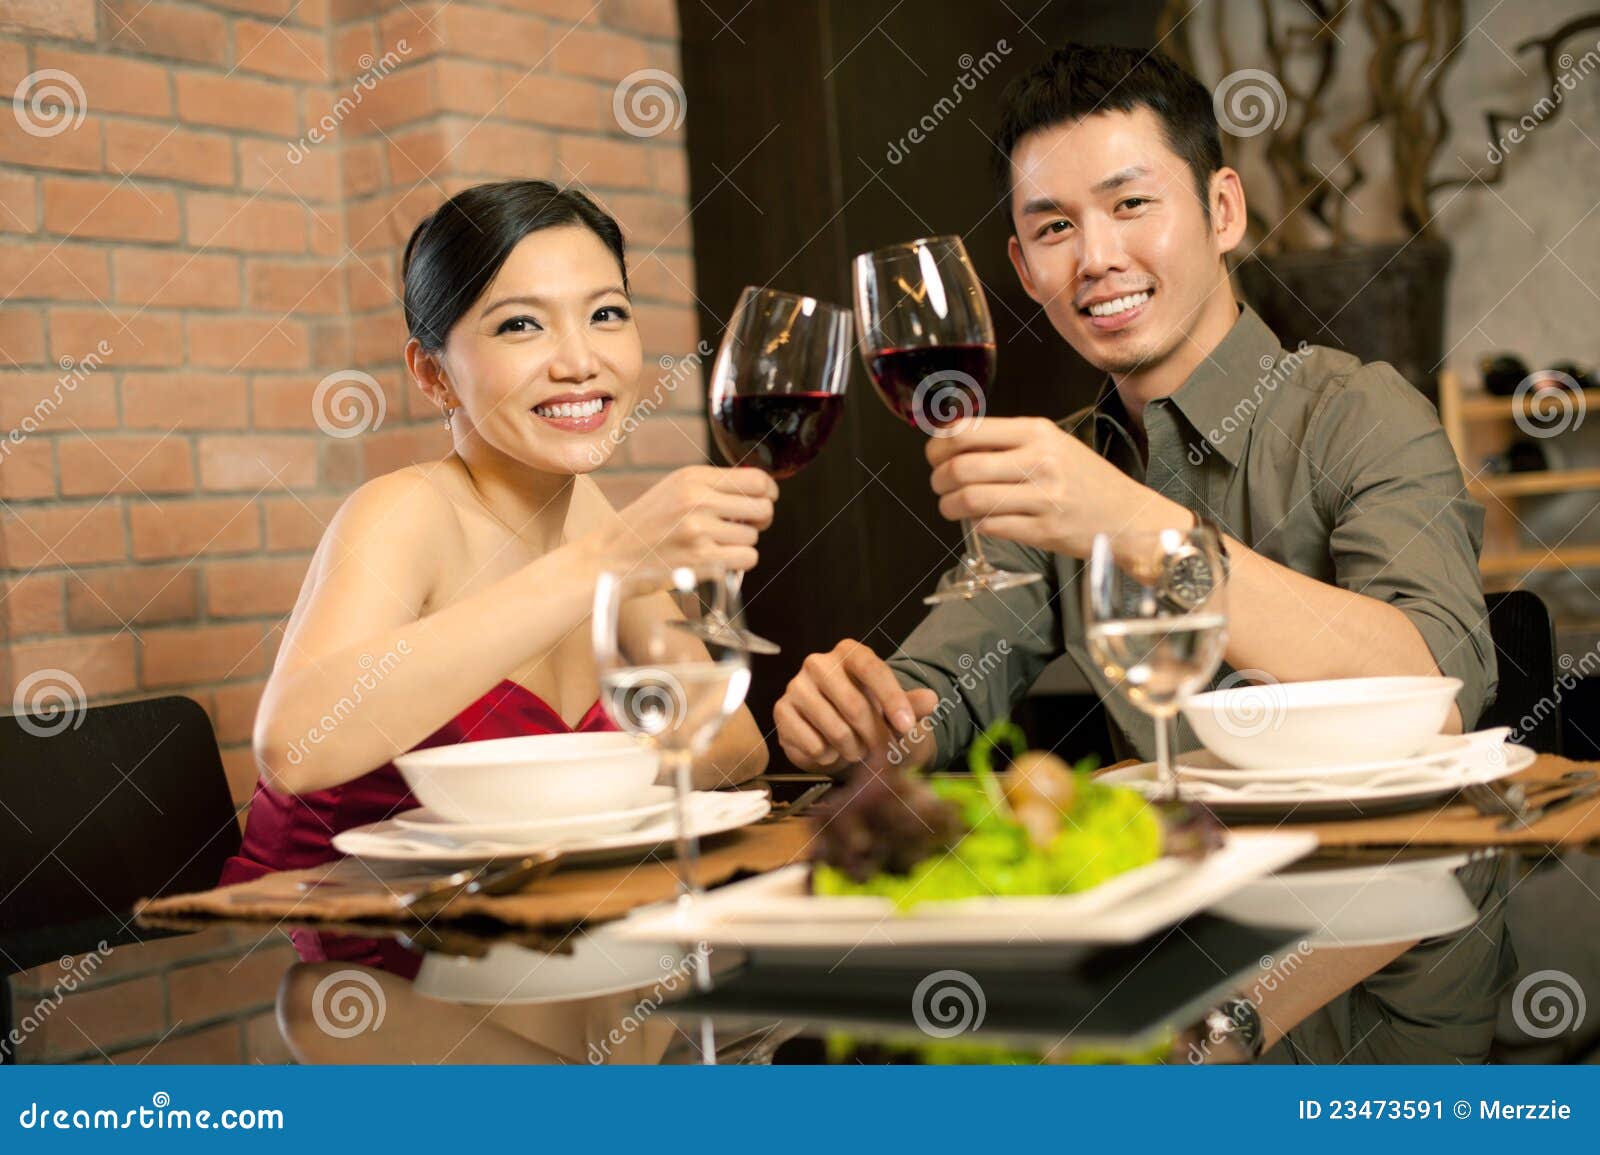 http://thumbs.dreamstime.com/z/asian-couples-lifestyle-23473591.jpg